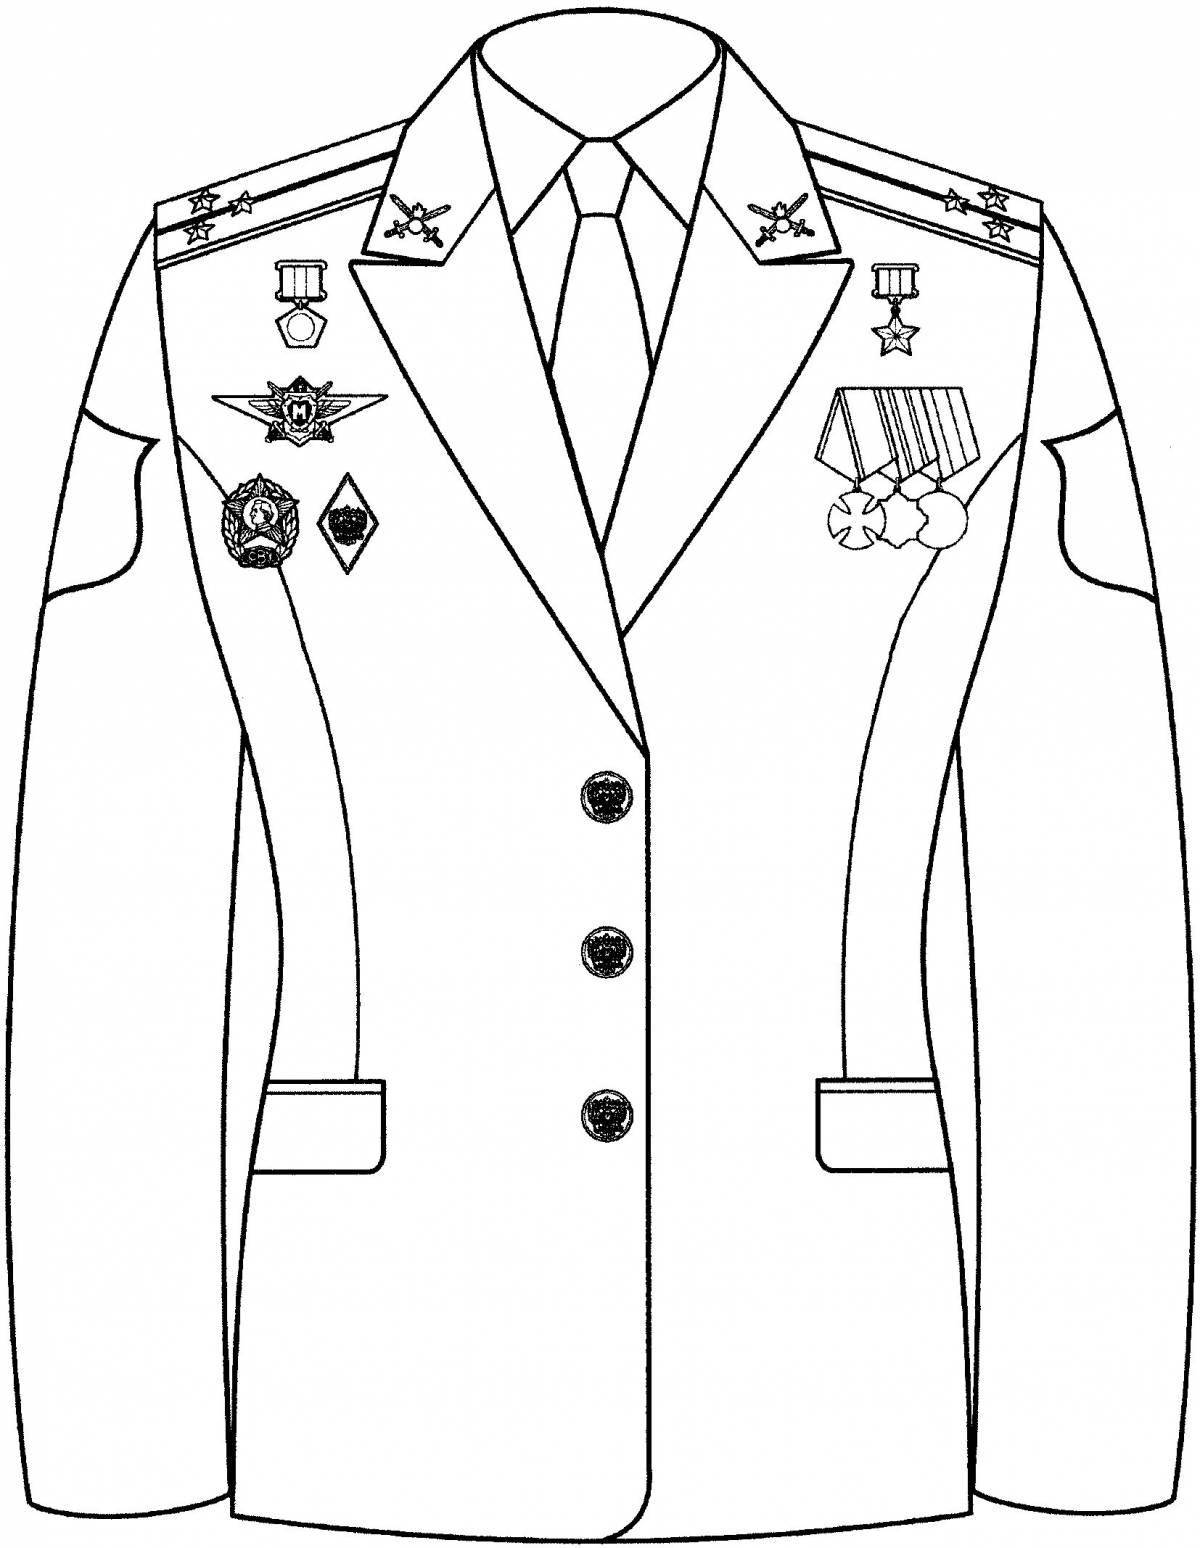 Intriguing military uniform coloring